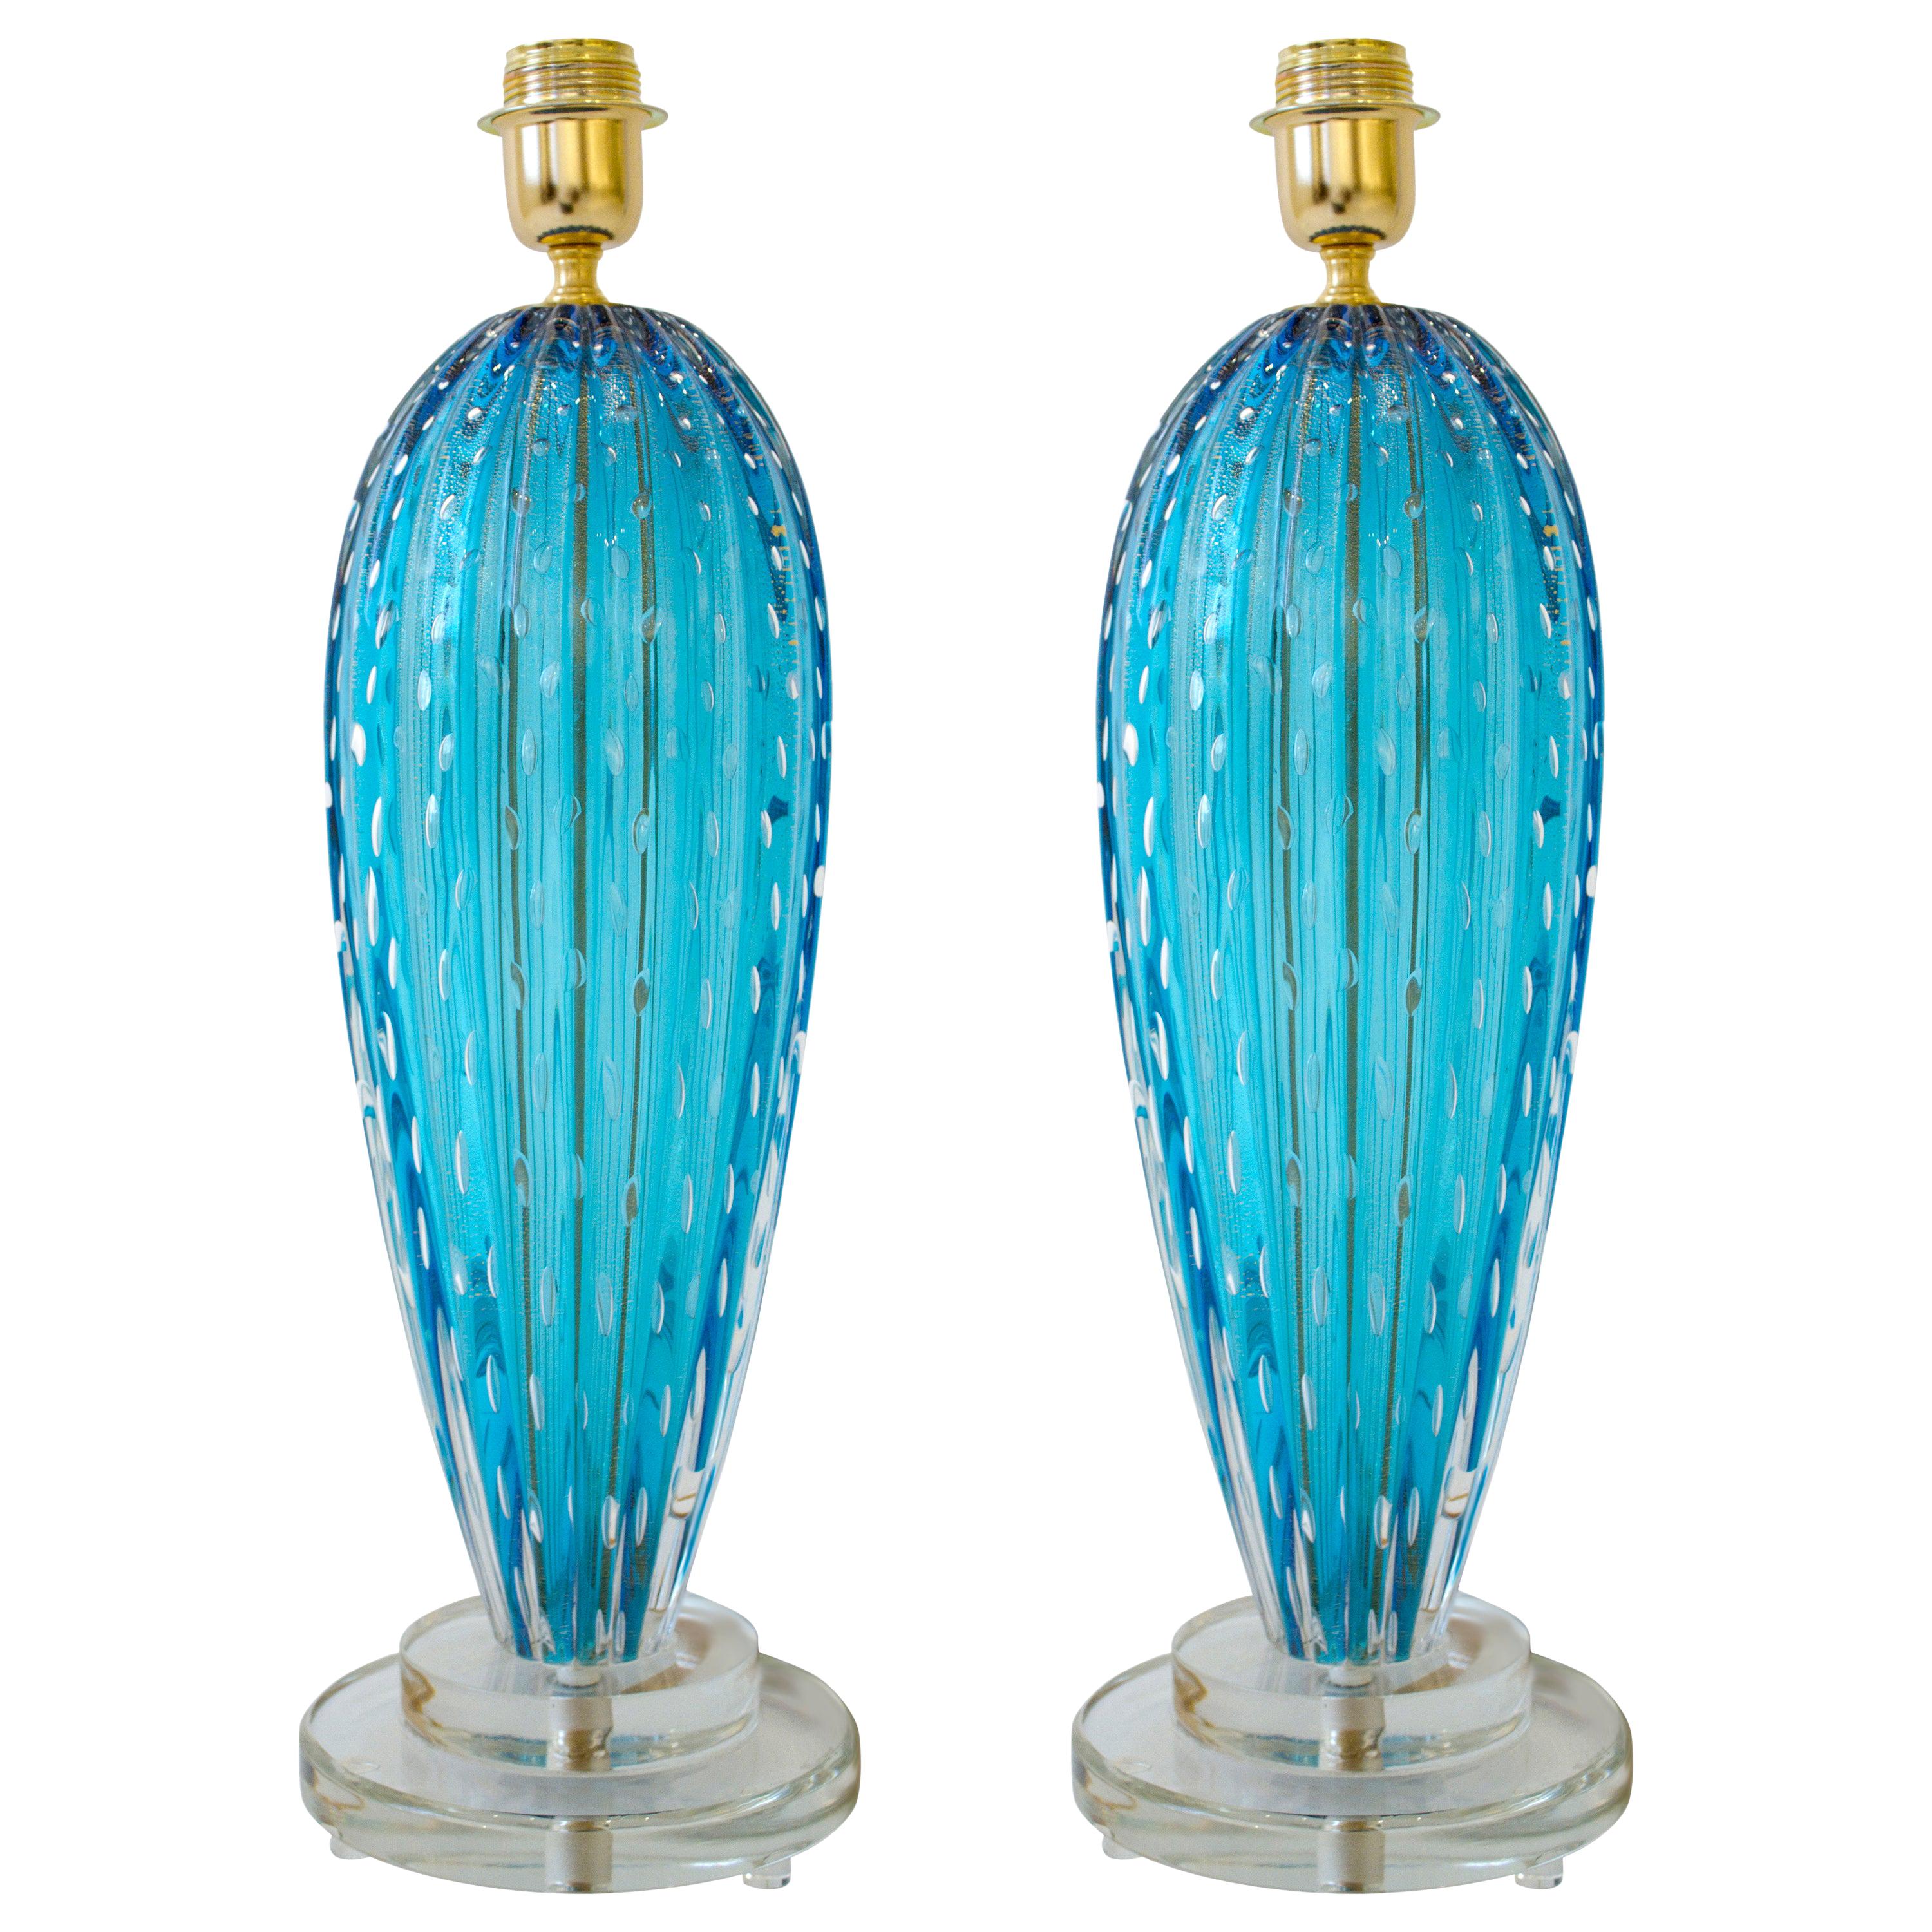 Pair of Aquamarine Blue or Blue Topaz Murano Glass Lamps, Italy, Signed